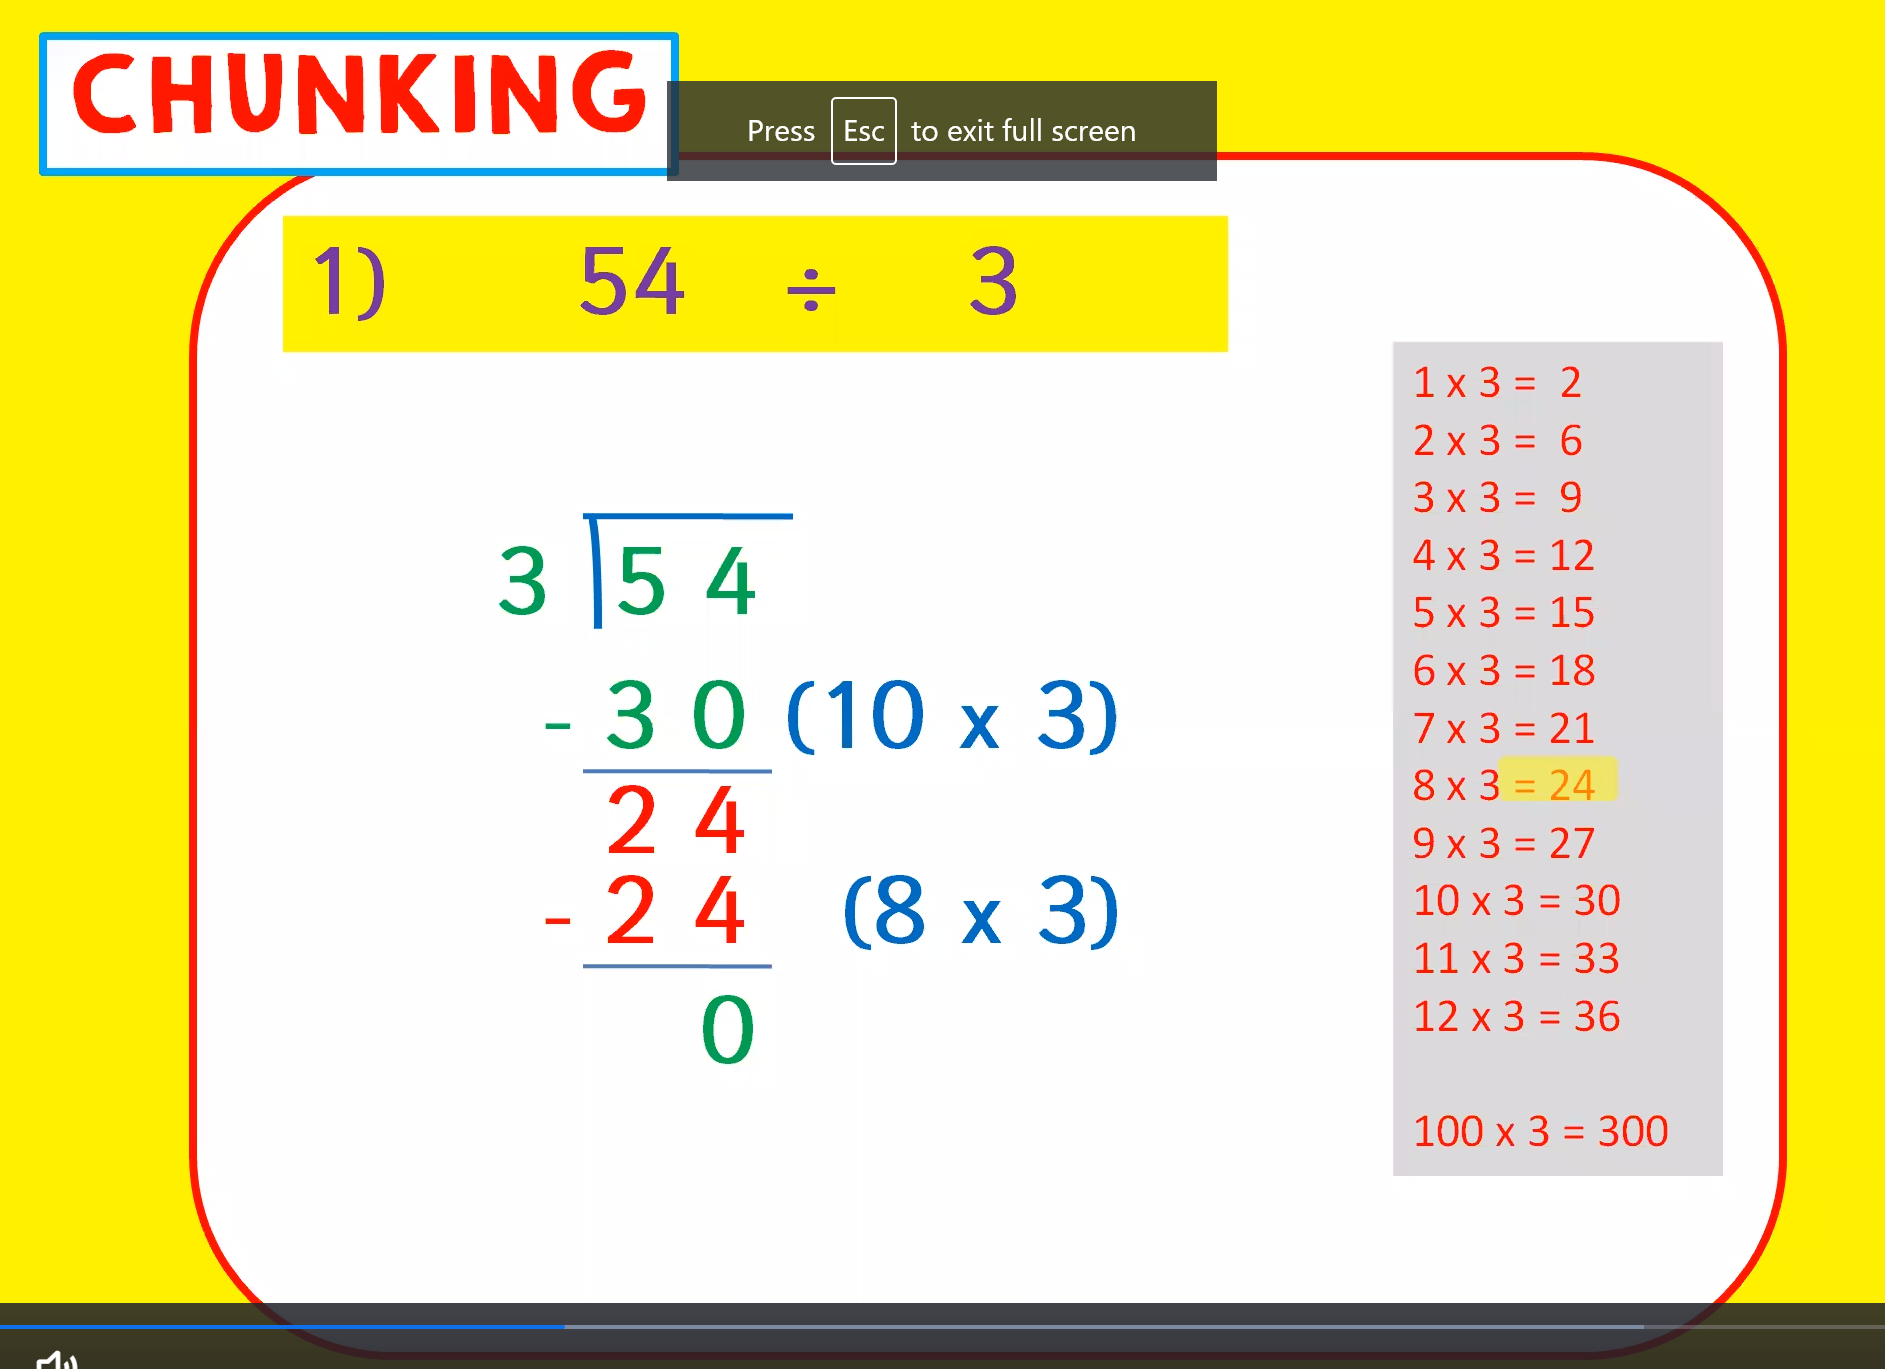 How to use chunking for long division - Better Tuition